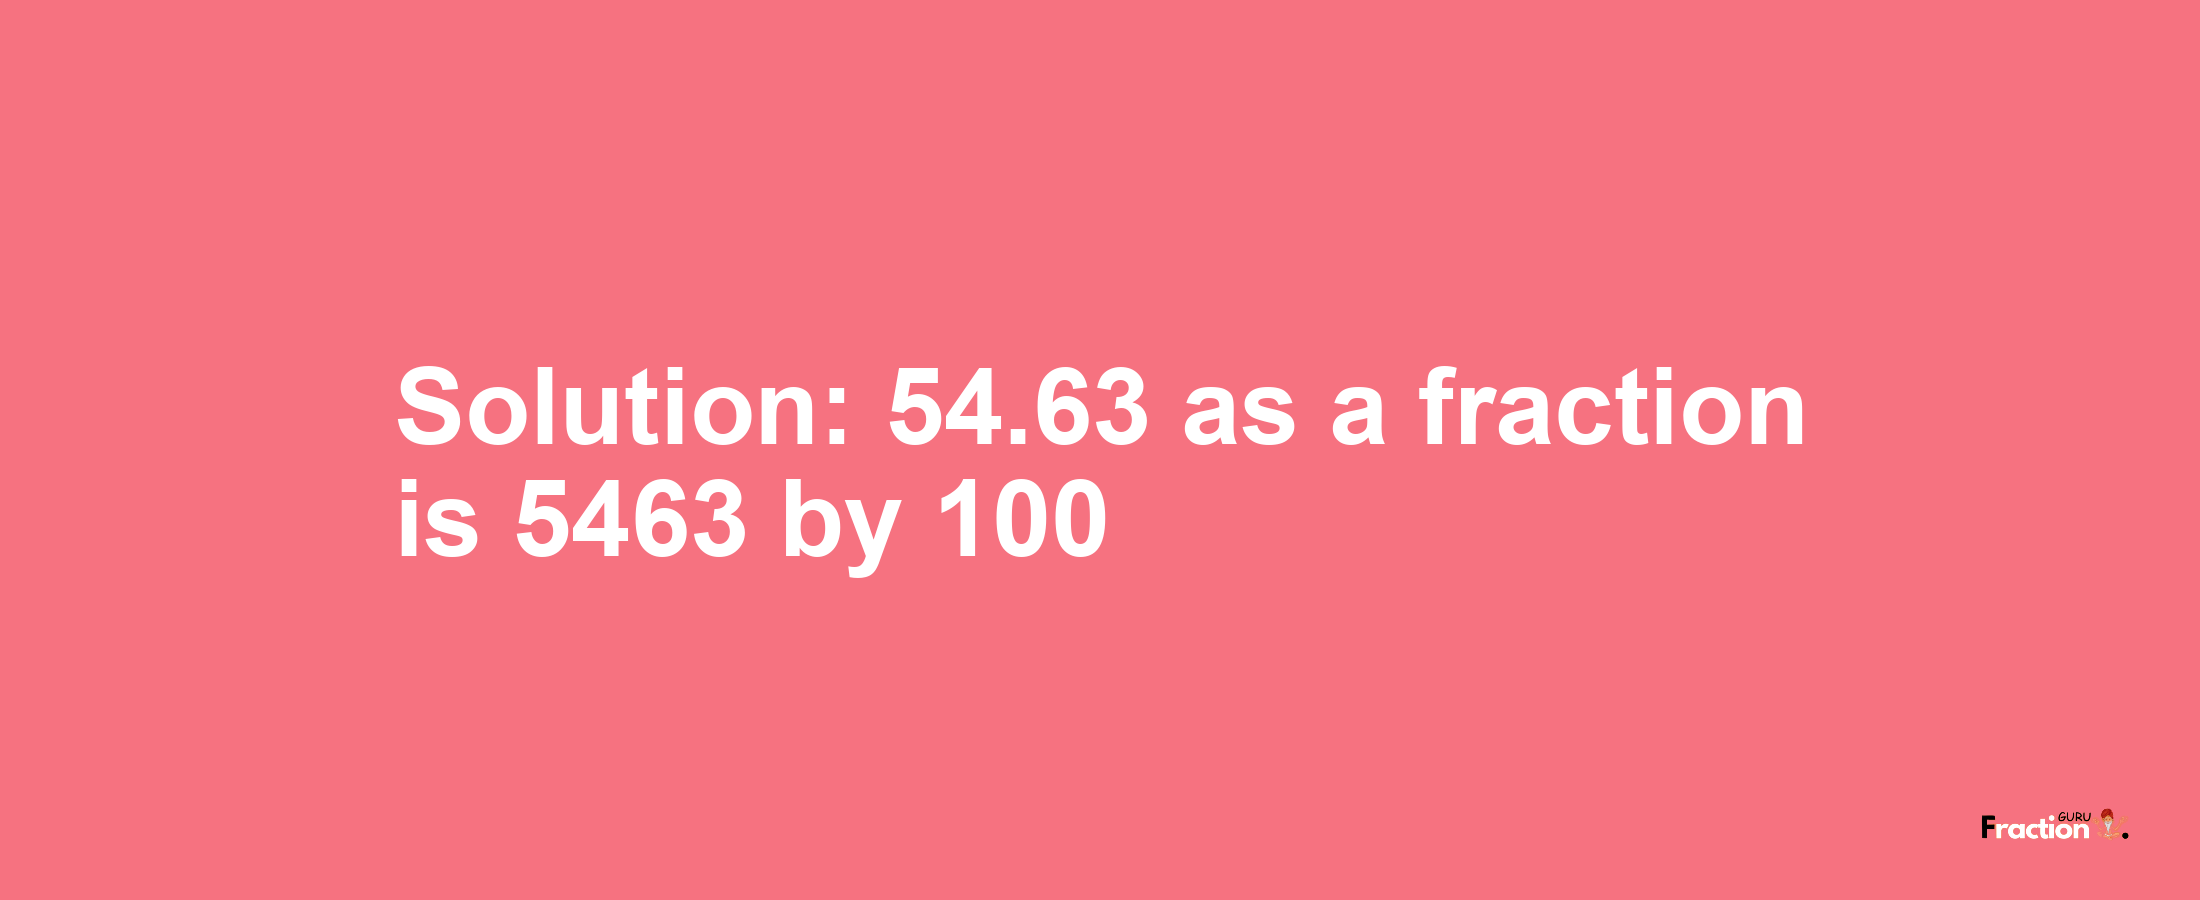 Solution:54.63 as a fraction is 5463/100